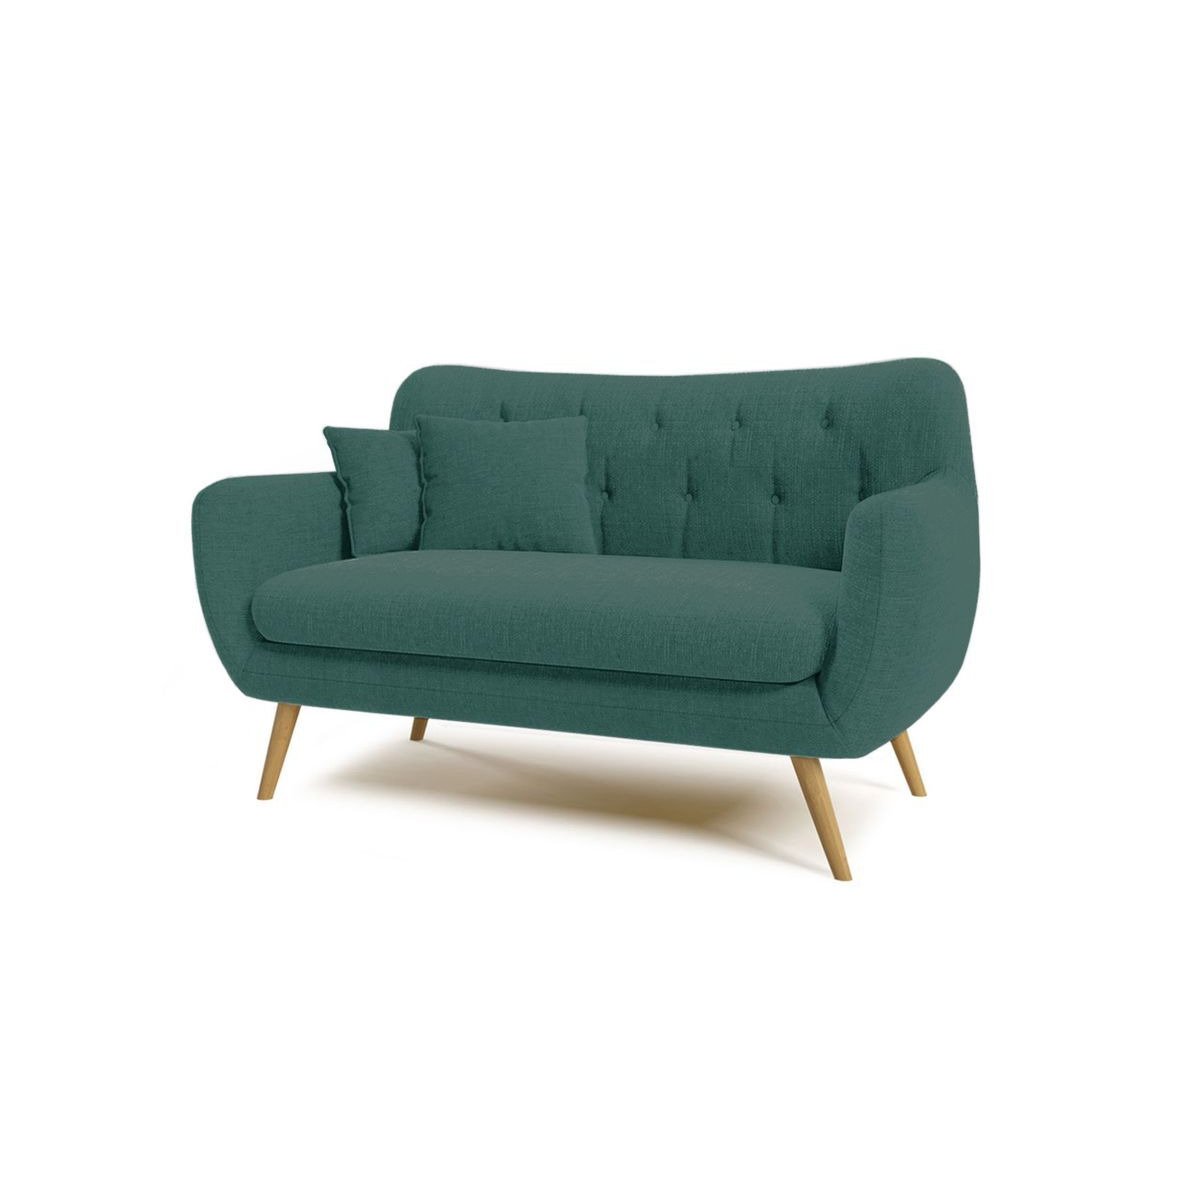 Revive 2 Seater Sofa, turquoise - image 1